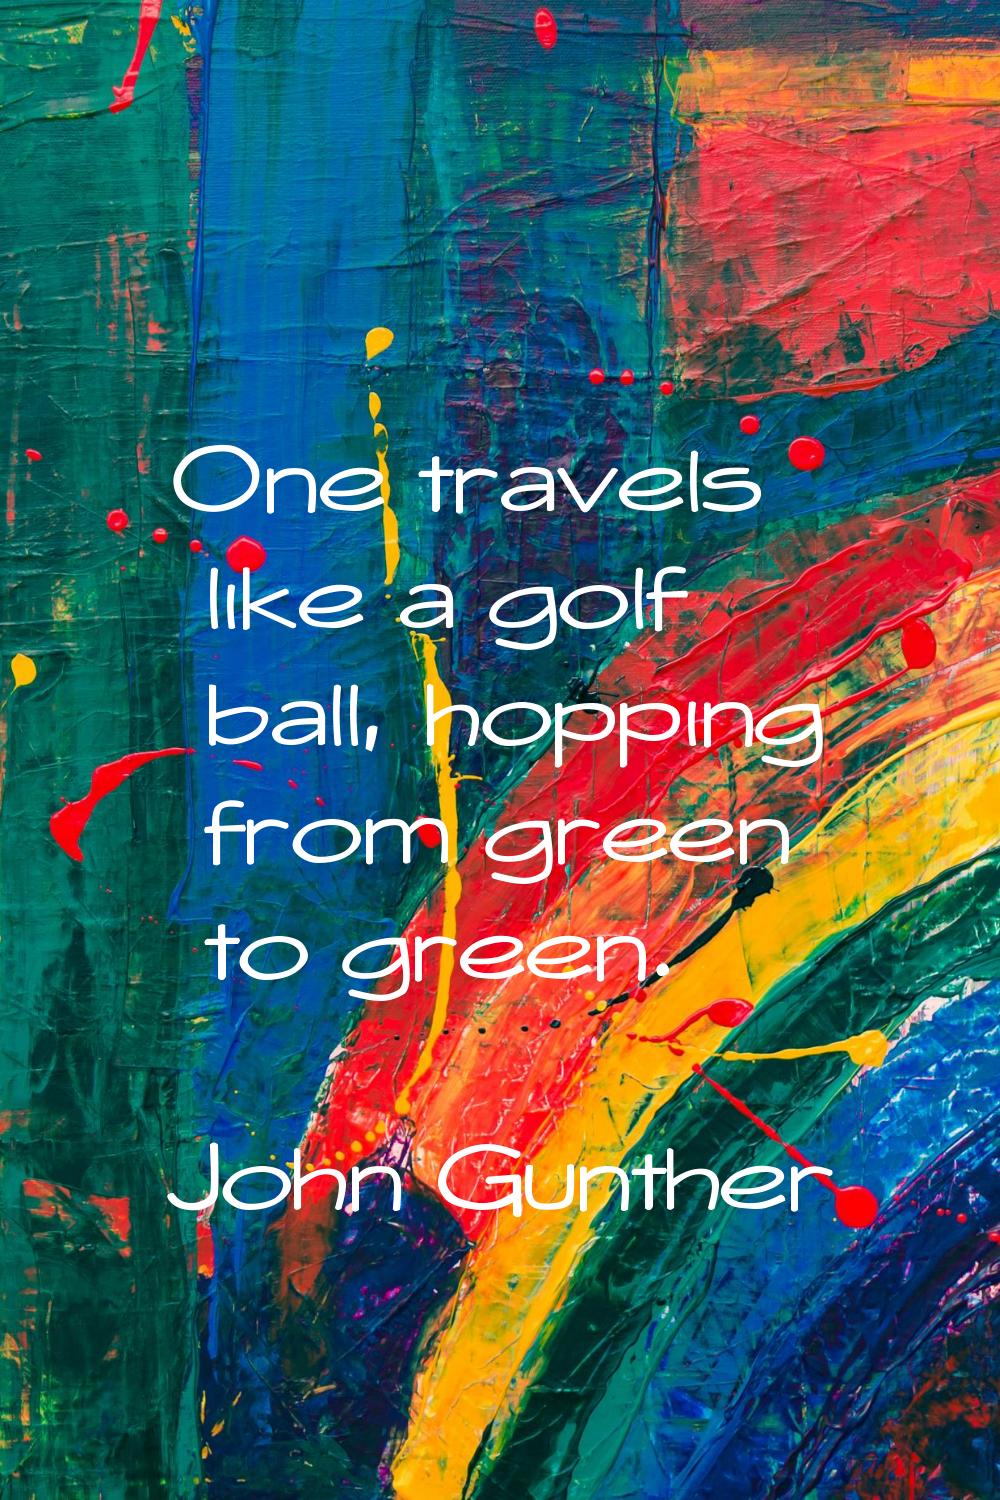 One travels like a golf ball, hopping from green to green.